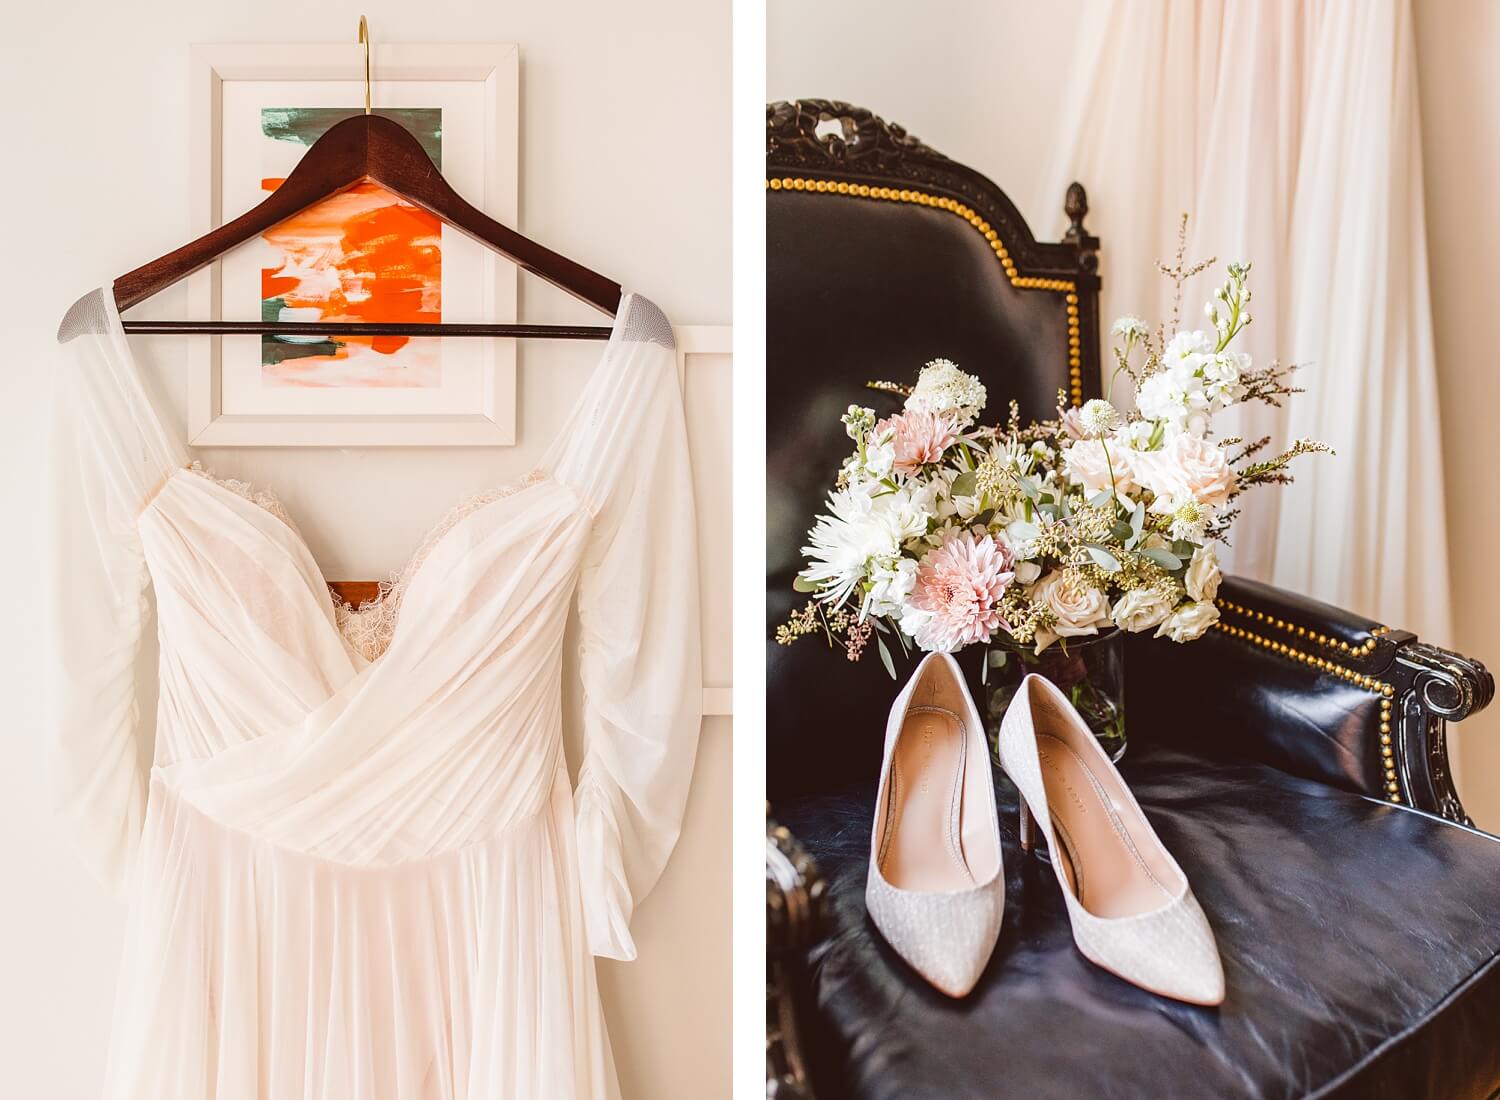 Off the shoulder chiffon wedding dress | hand-tied white and pink bouquet and white wedding shoes | Brooke Michelle Photography